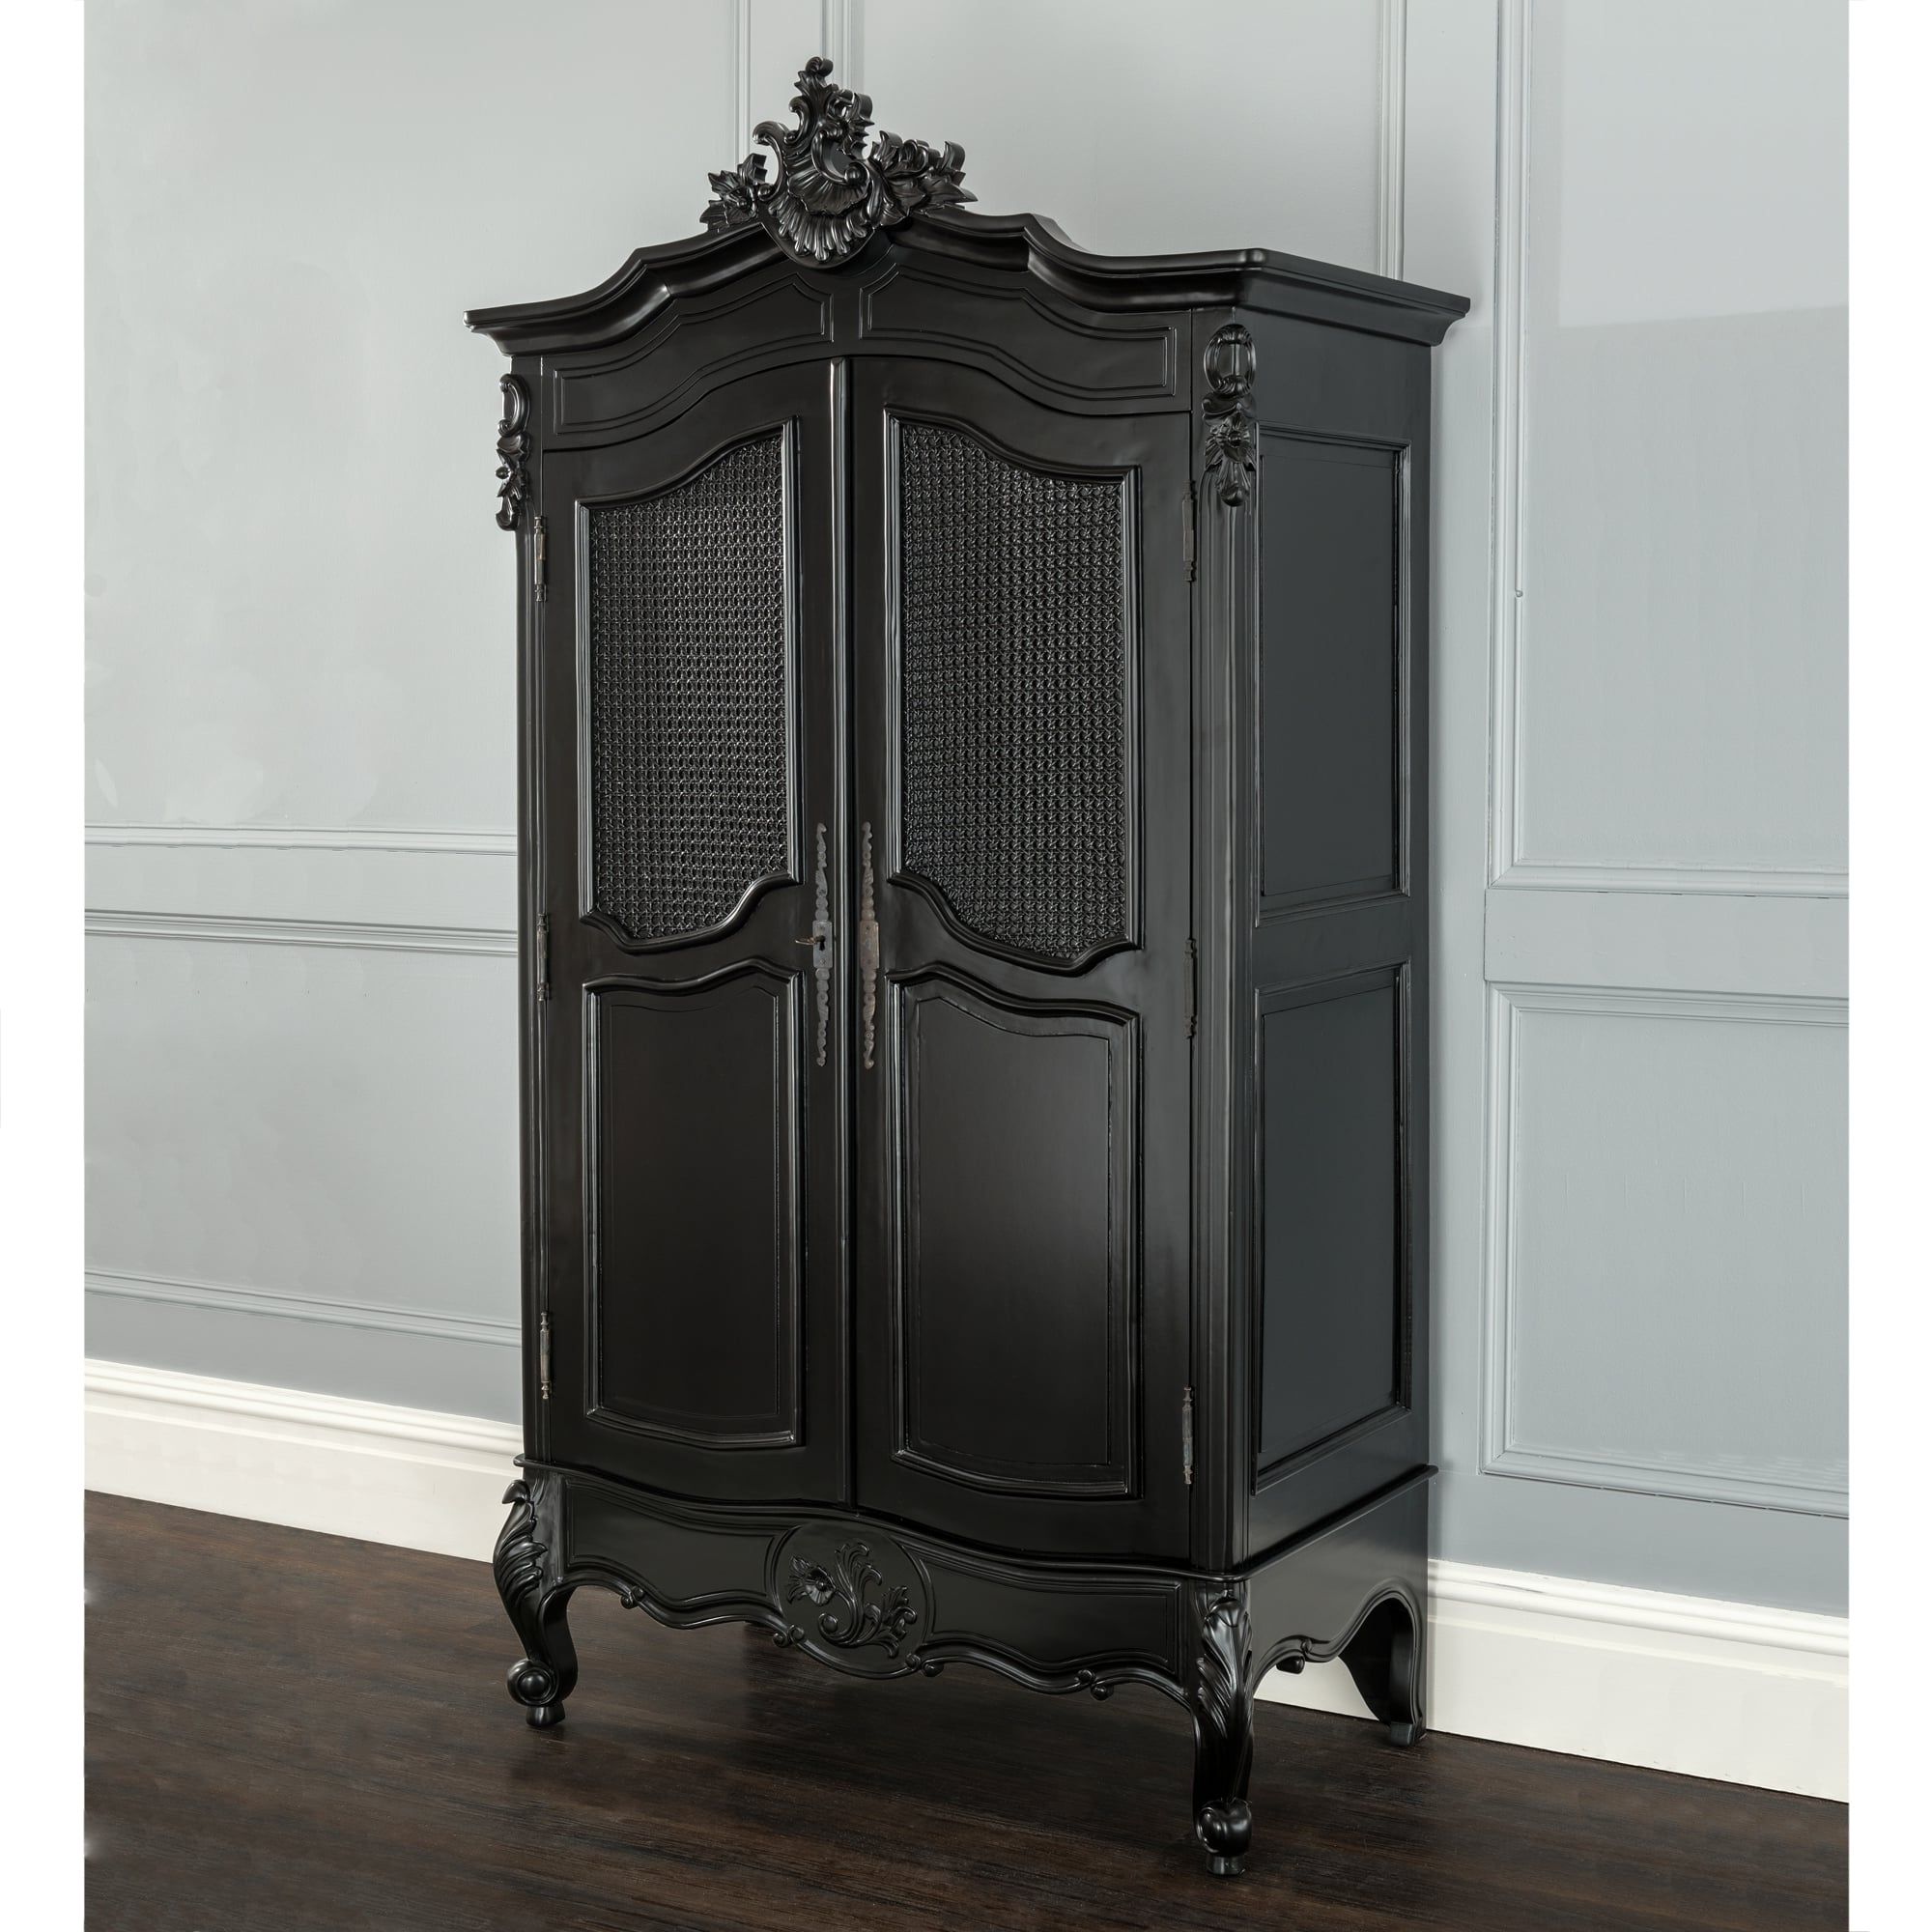 Black Painted Furniture Within Antique French Wardrobes (View 11 of 15)